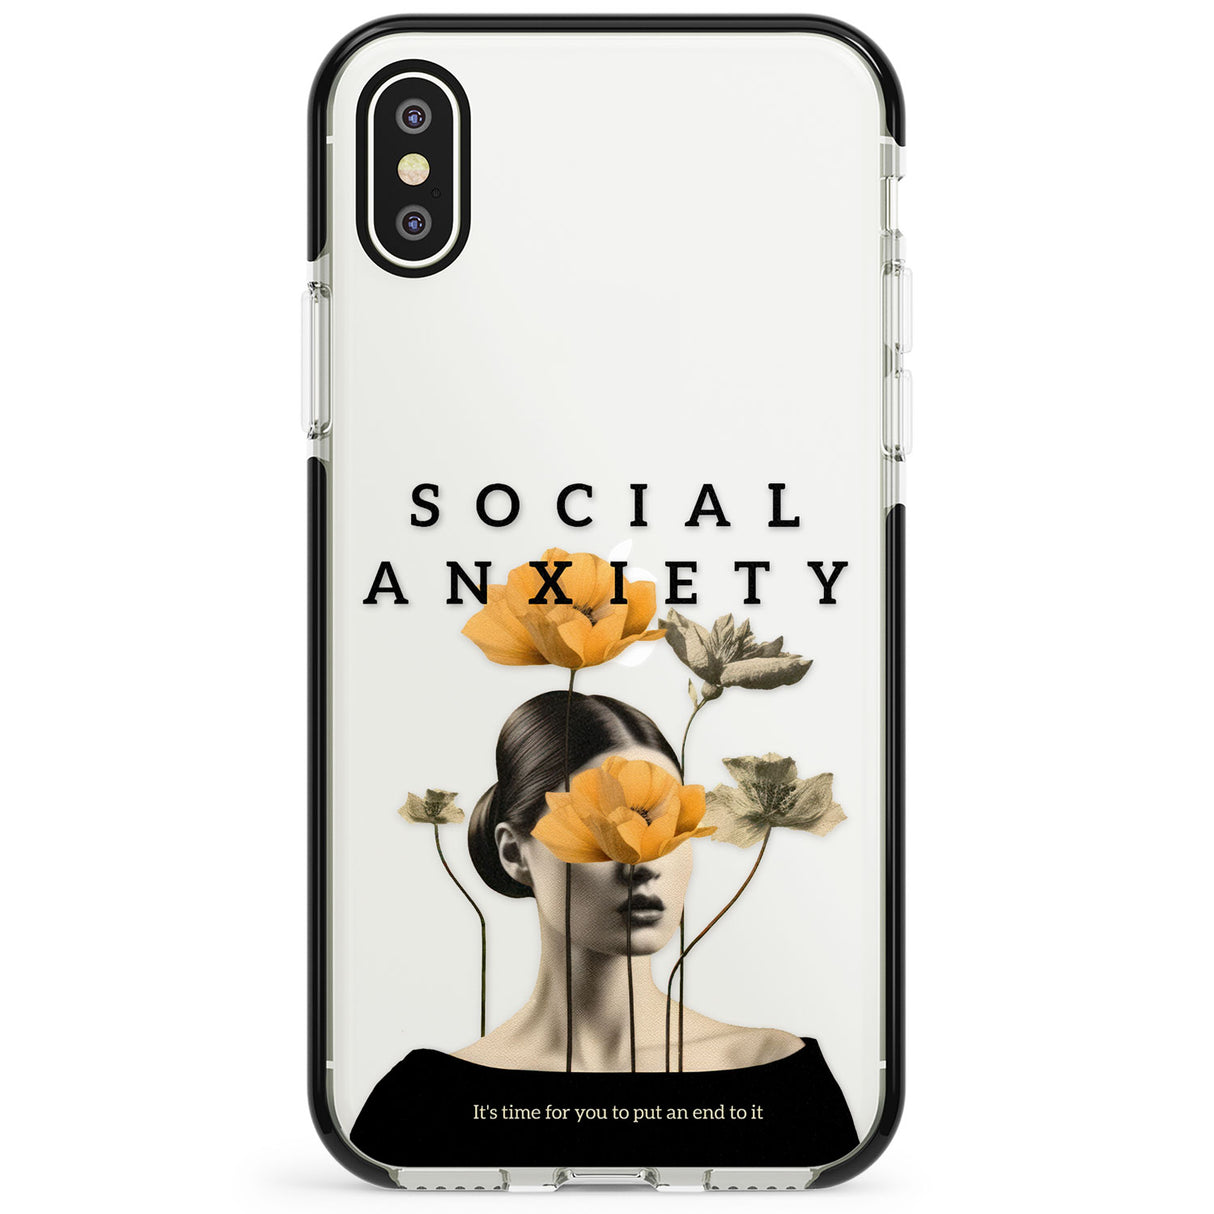 Social Anxiety Phone Case for iPhone X XS Max XR